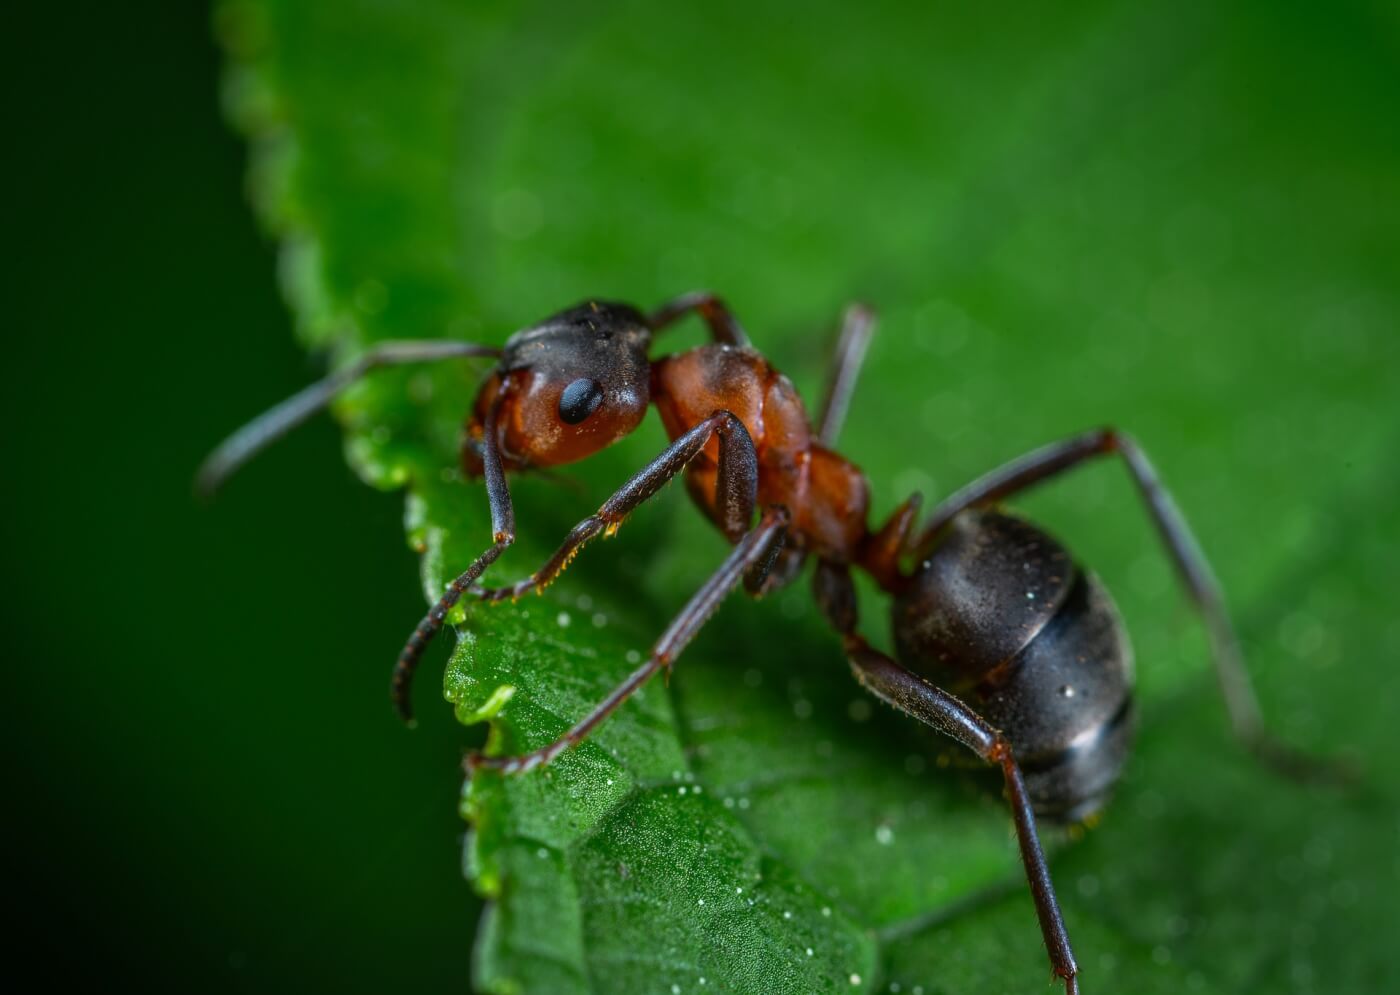 ant on a leaf, to represent many fascinating ant facts